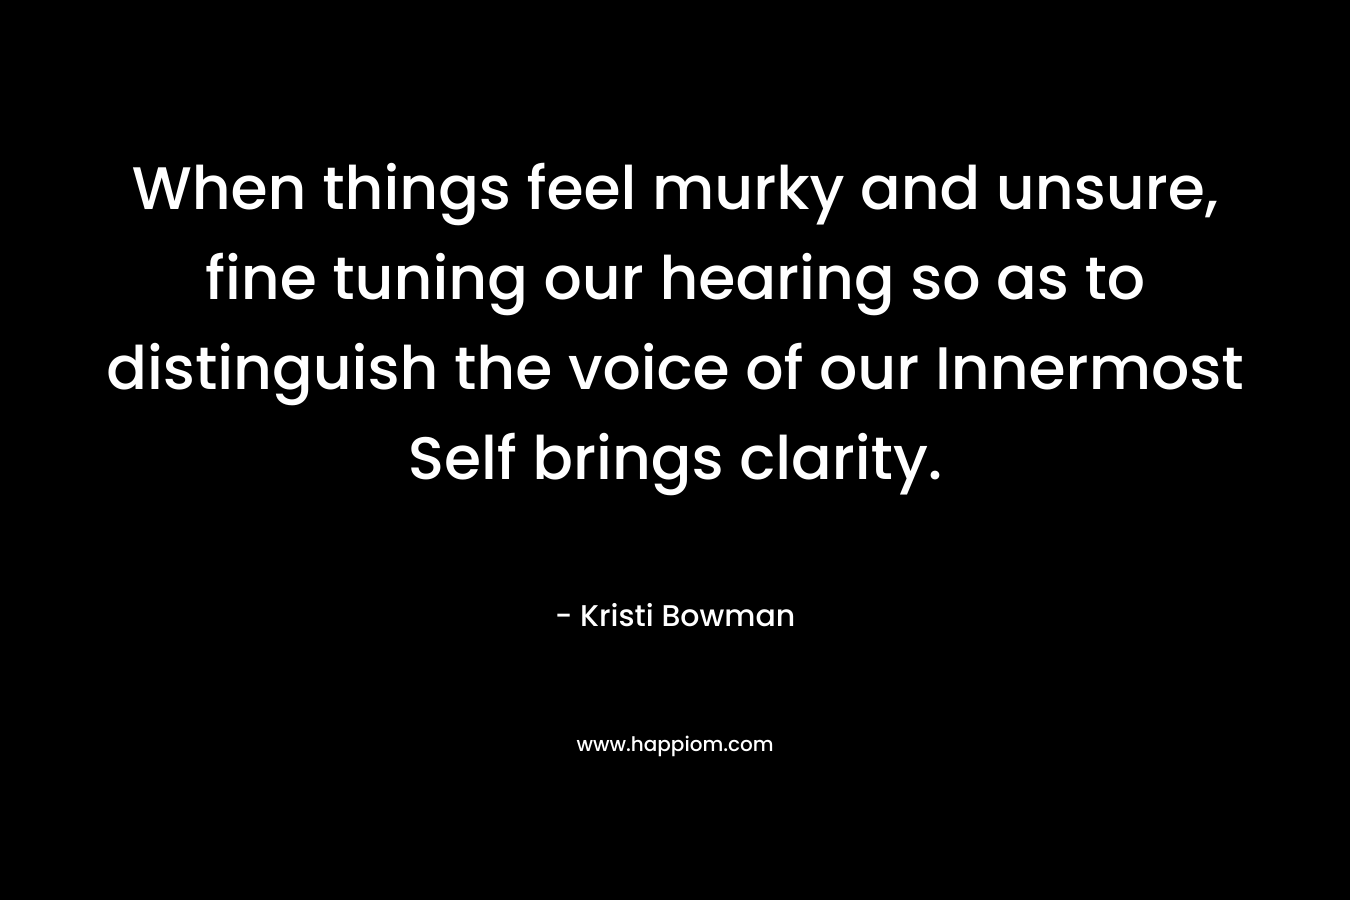 When things feel murky and unsure, fine tuning our hearing so as to distinguish the voice of our Innermost Self brings clarity. – Kristi Bowman